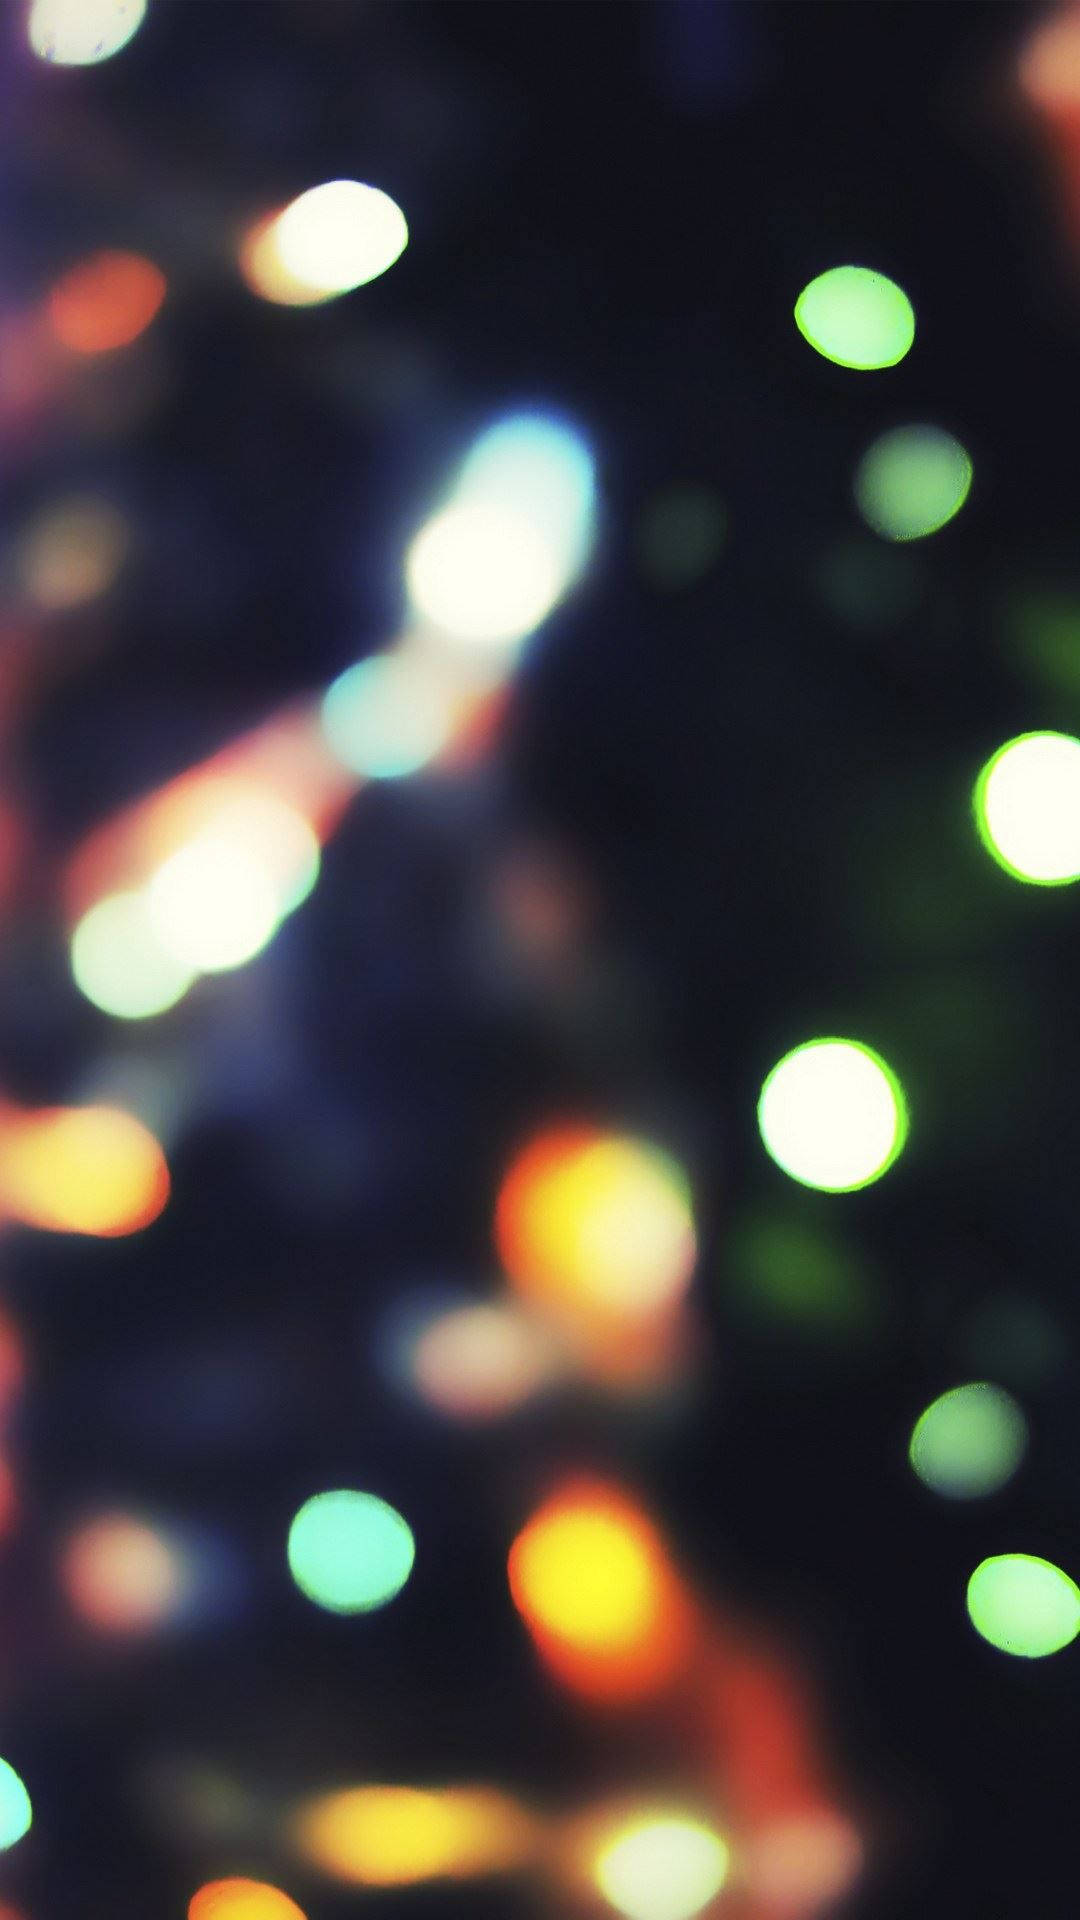 Illuminate the Holidays with this Festive Christmas Lights iPhone Wallpaper Wallpaper